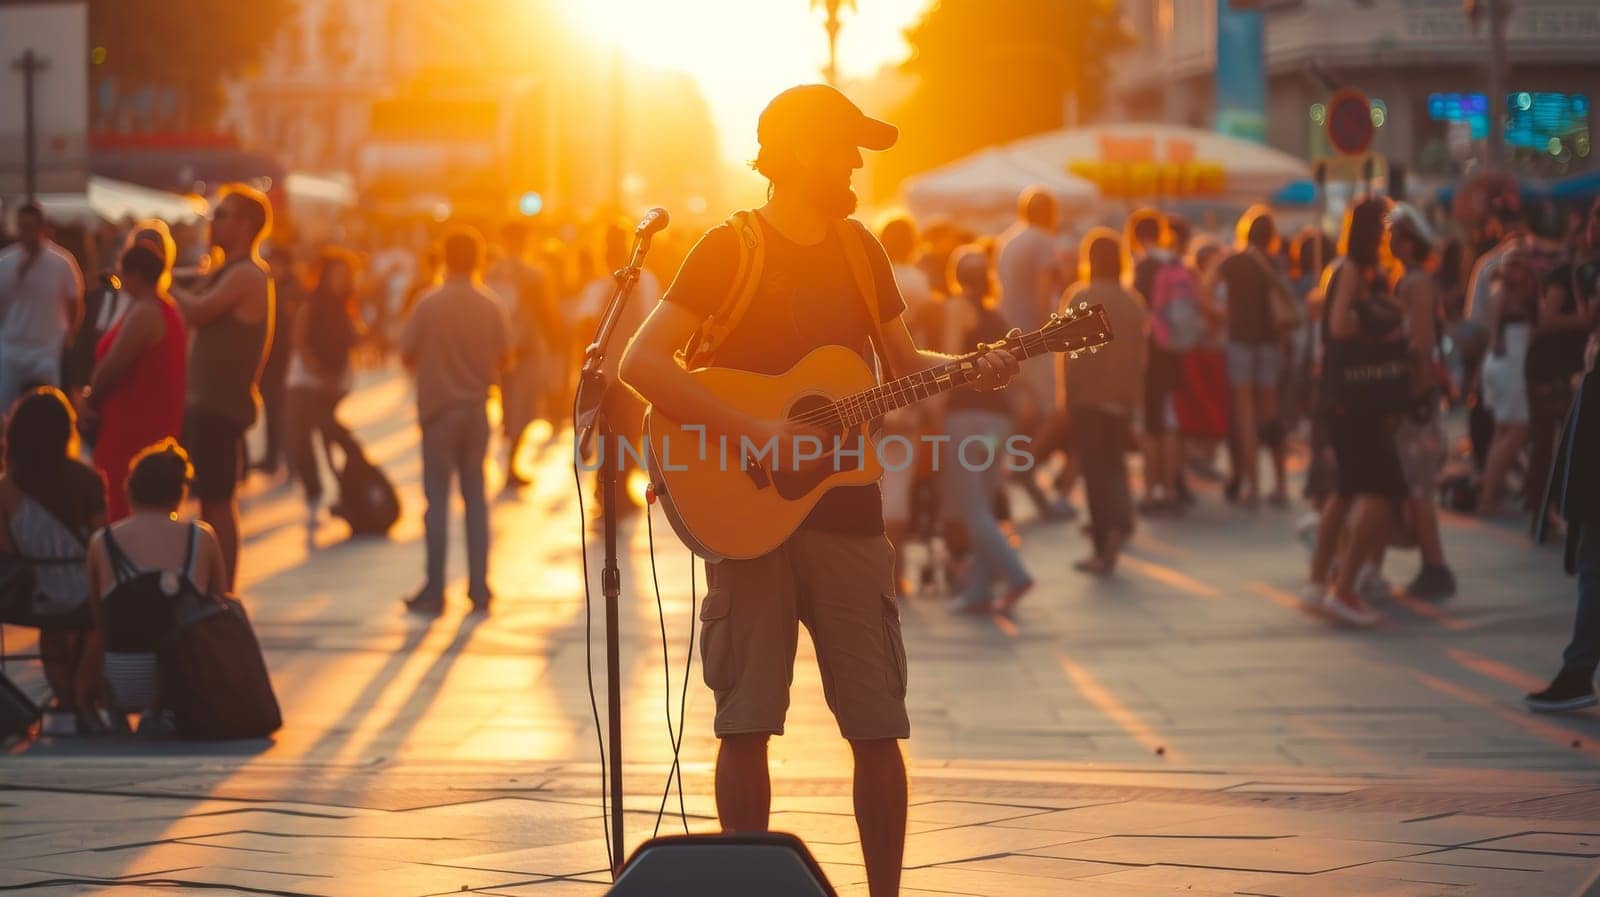 Guitarist performing live on a busy city street at sunset with a crowd of pedestrians in the background